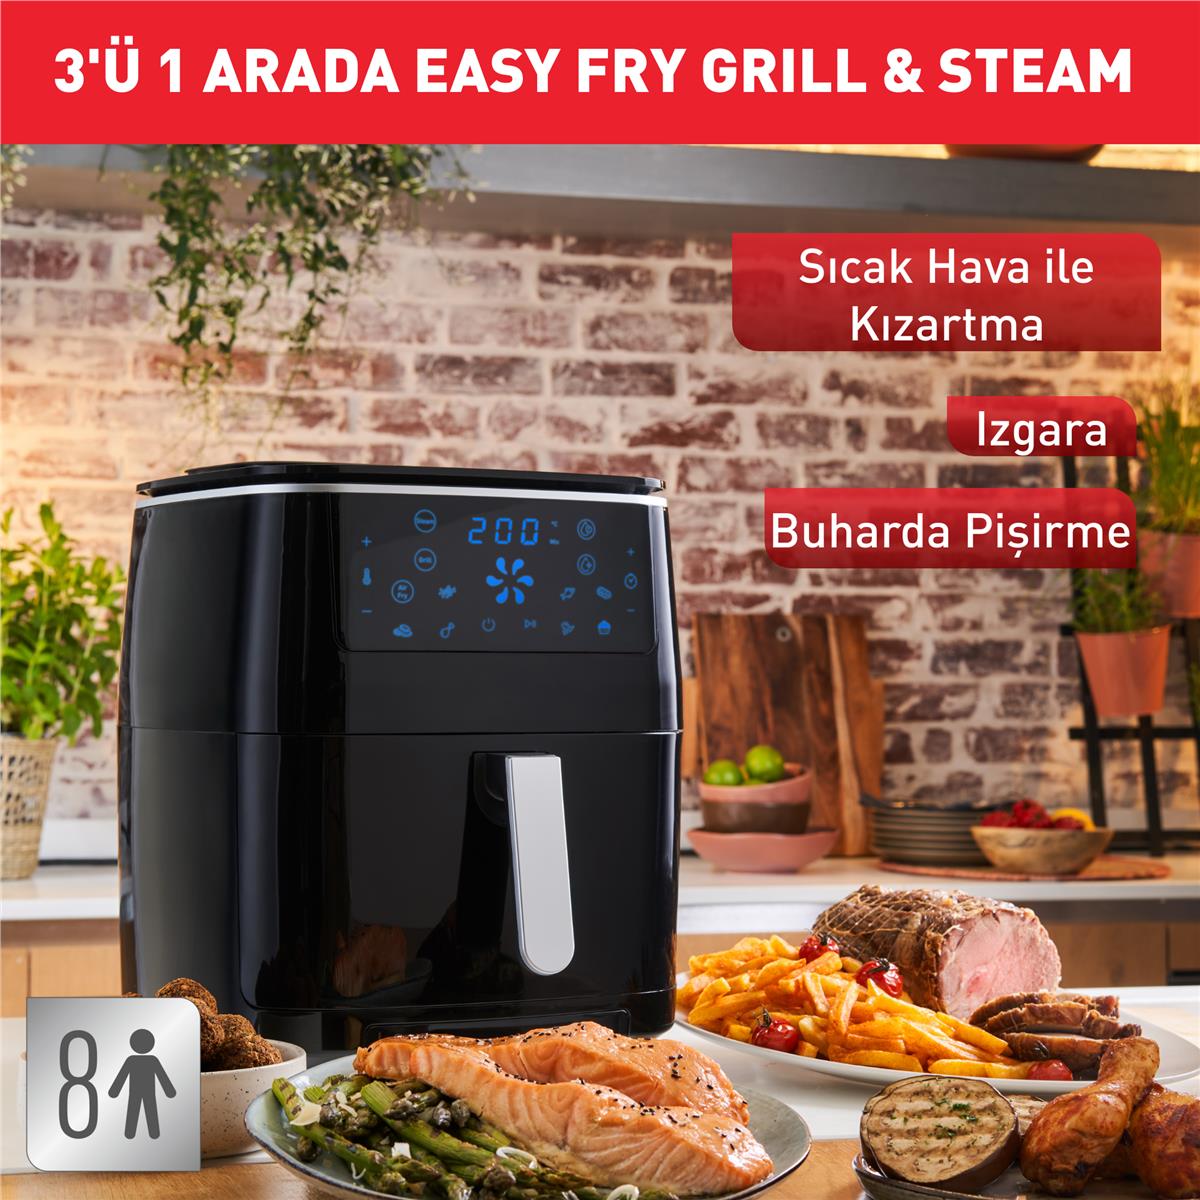 Easy fry grill. Tefal easy Fry Grill &amp; Steam.